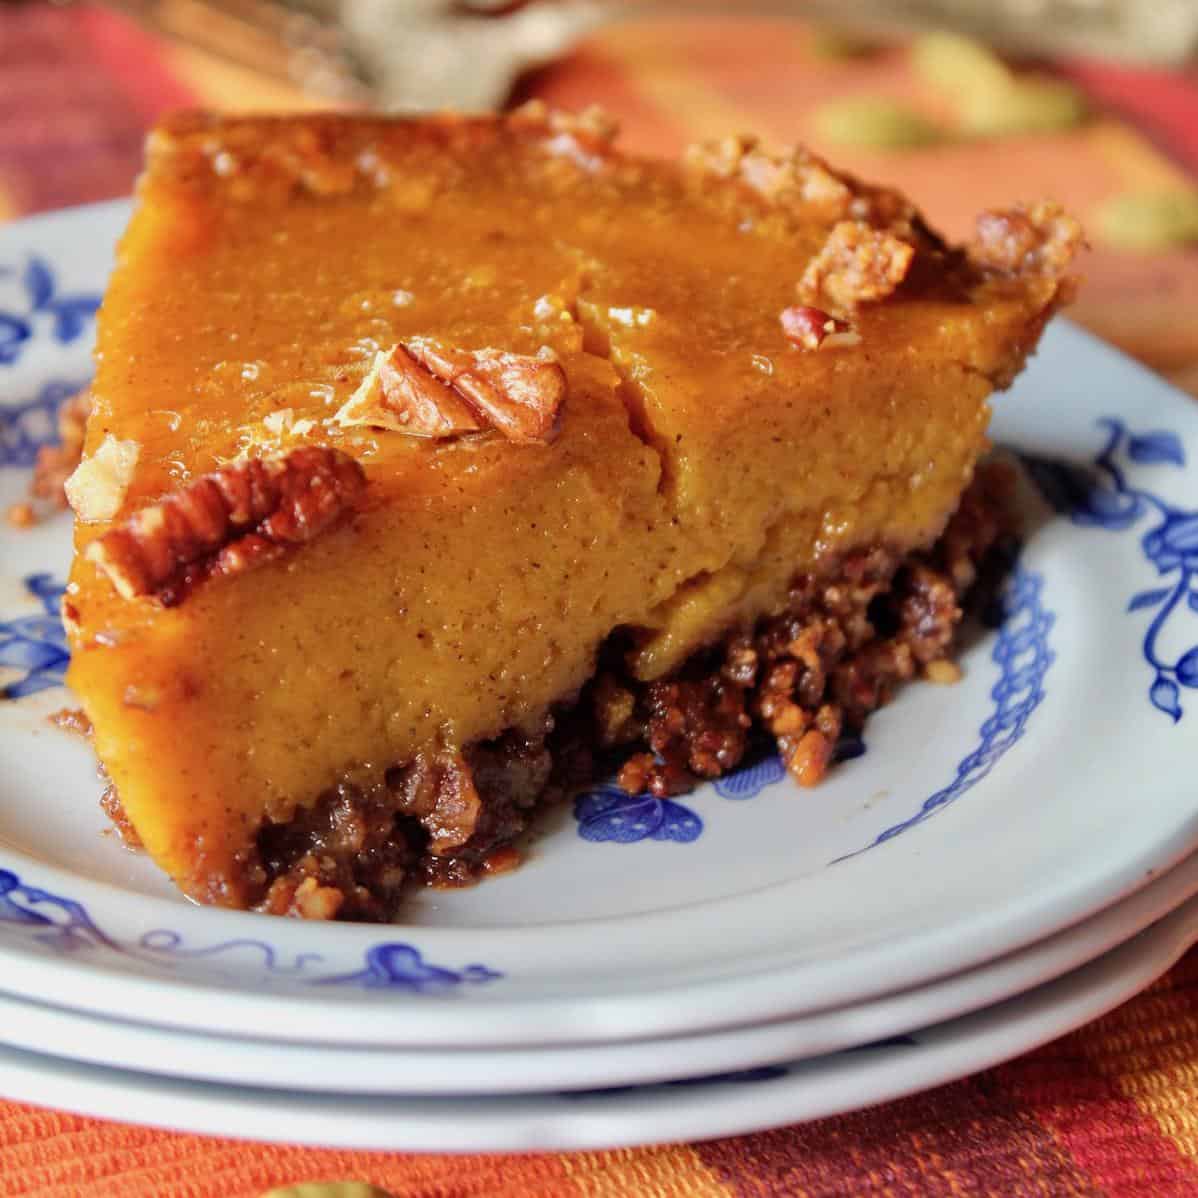  The gooey caramel and crunchy pecans are the perfect pair for this classic pumpkin pie.